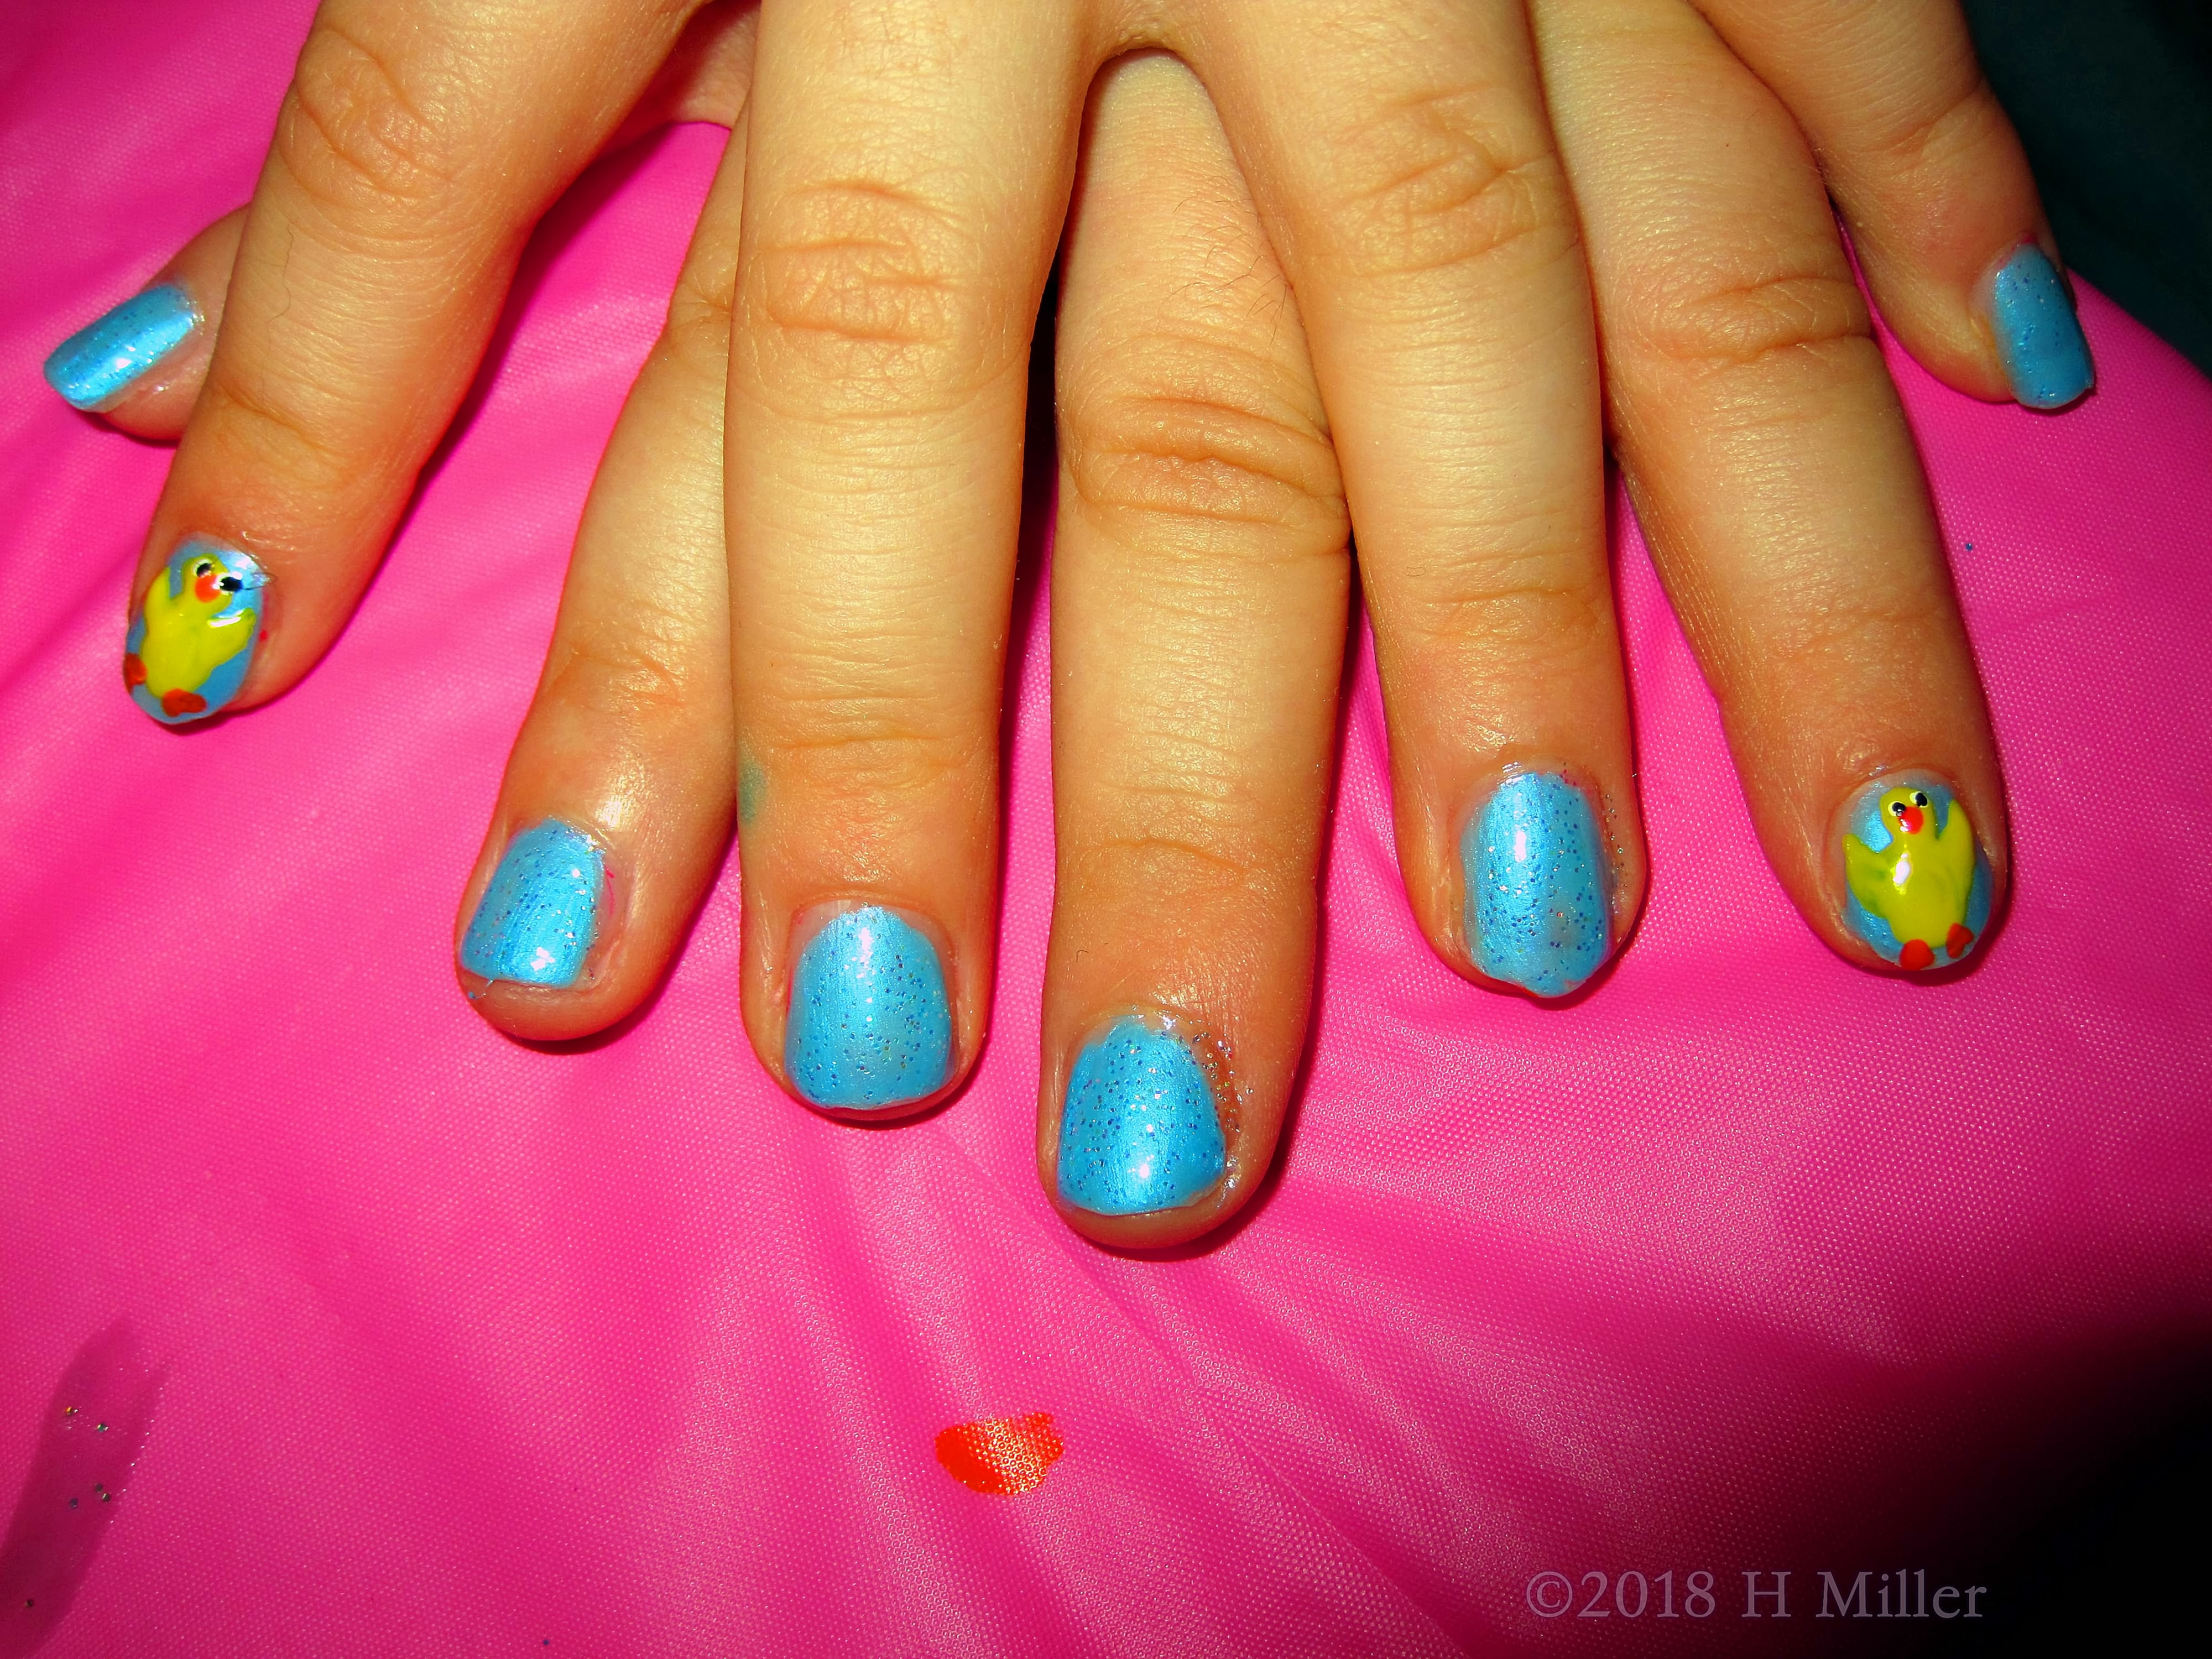 Sparkly And Ducky With Pretty Nail Art! 4